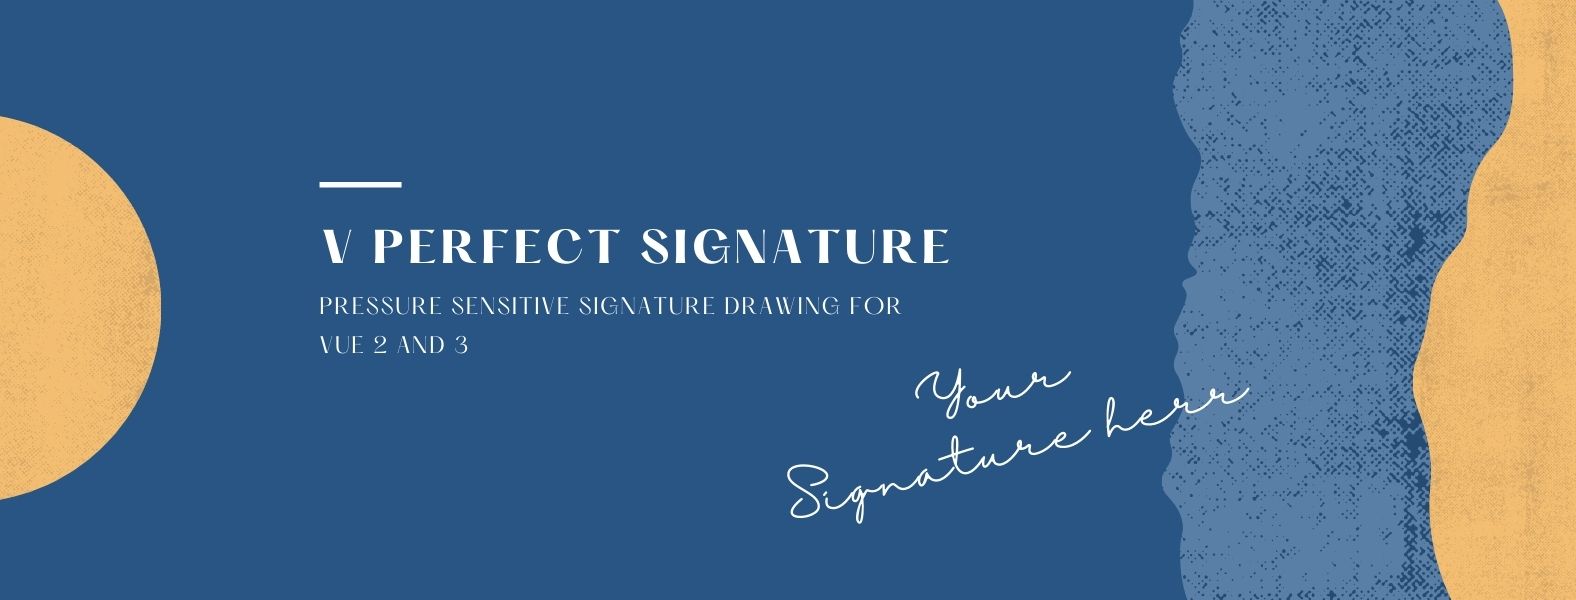 Pressure Sensitive Signature Drawing for Vue 2 and 3 